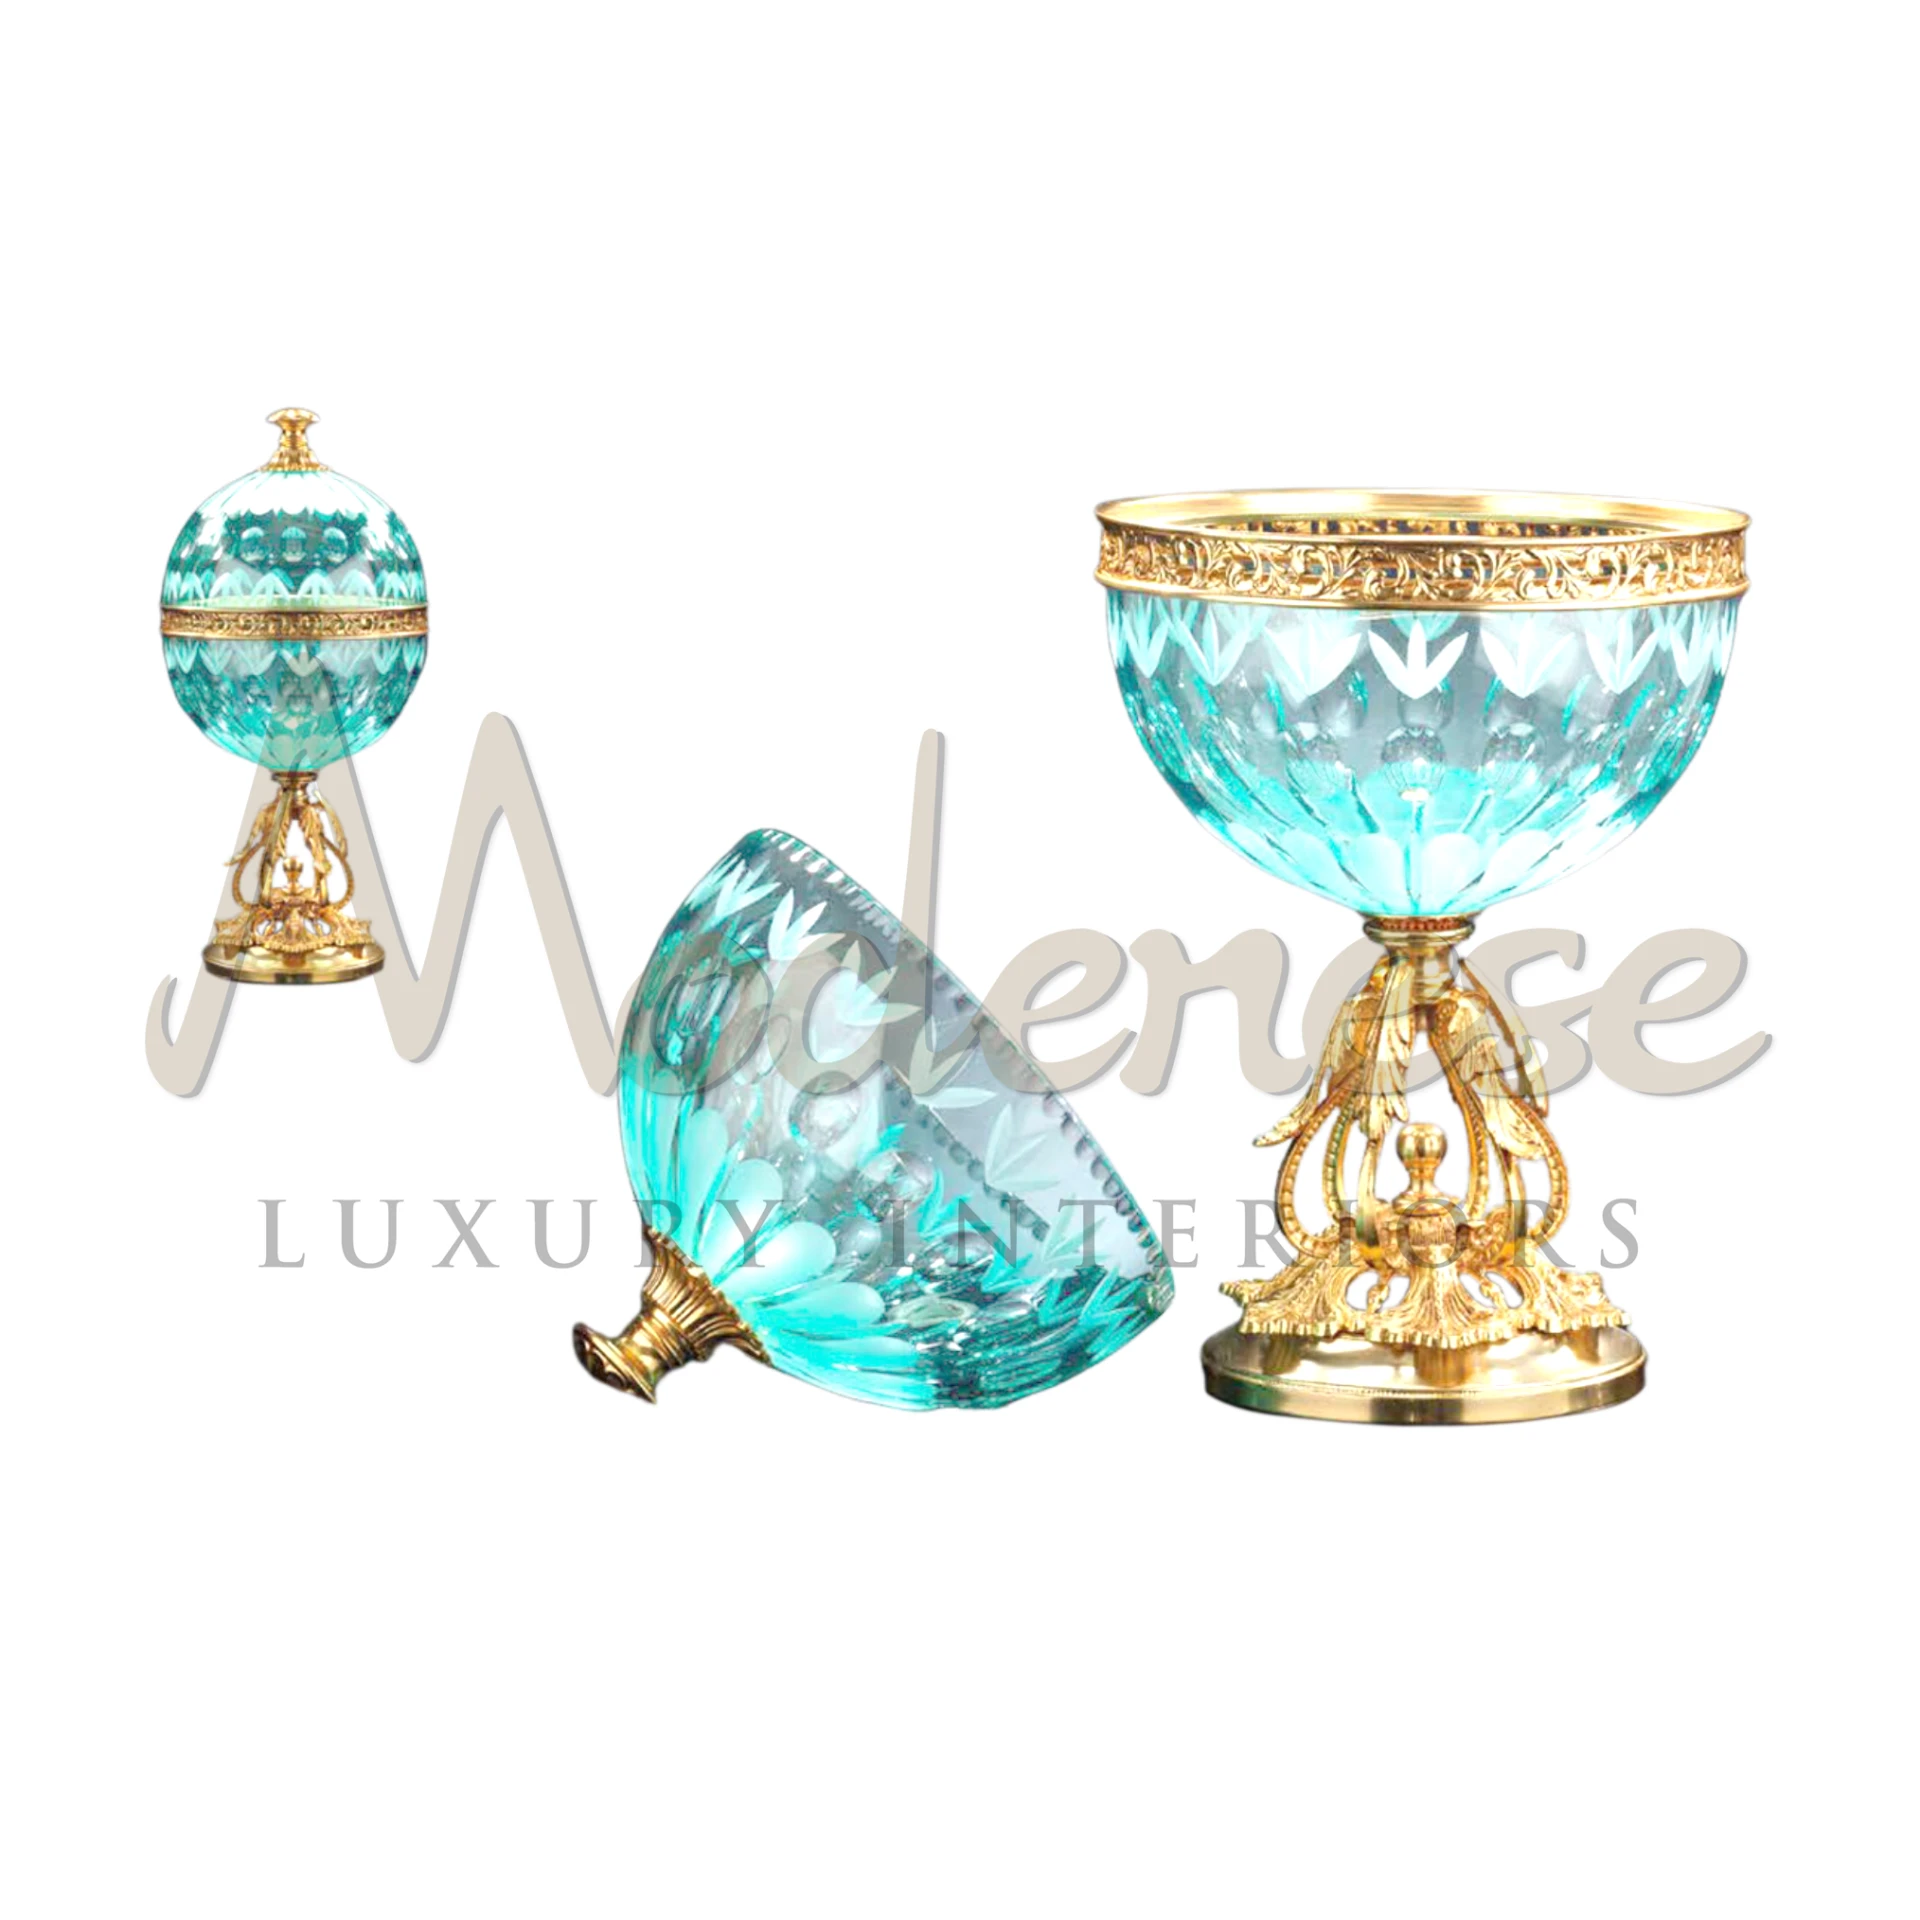 Classical Turquoise Box, exquisite in fine porcelain or glass, embodies timeless elegance for luxury interiors, perfect for classic and baroque style aficionados.






